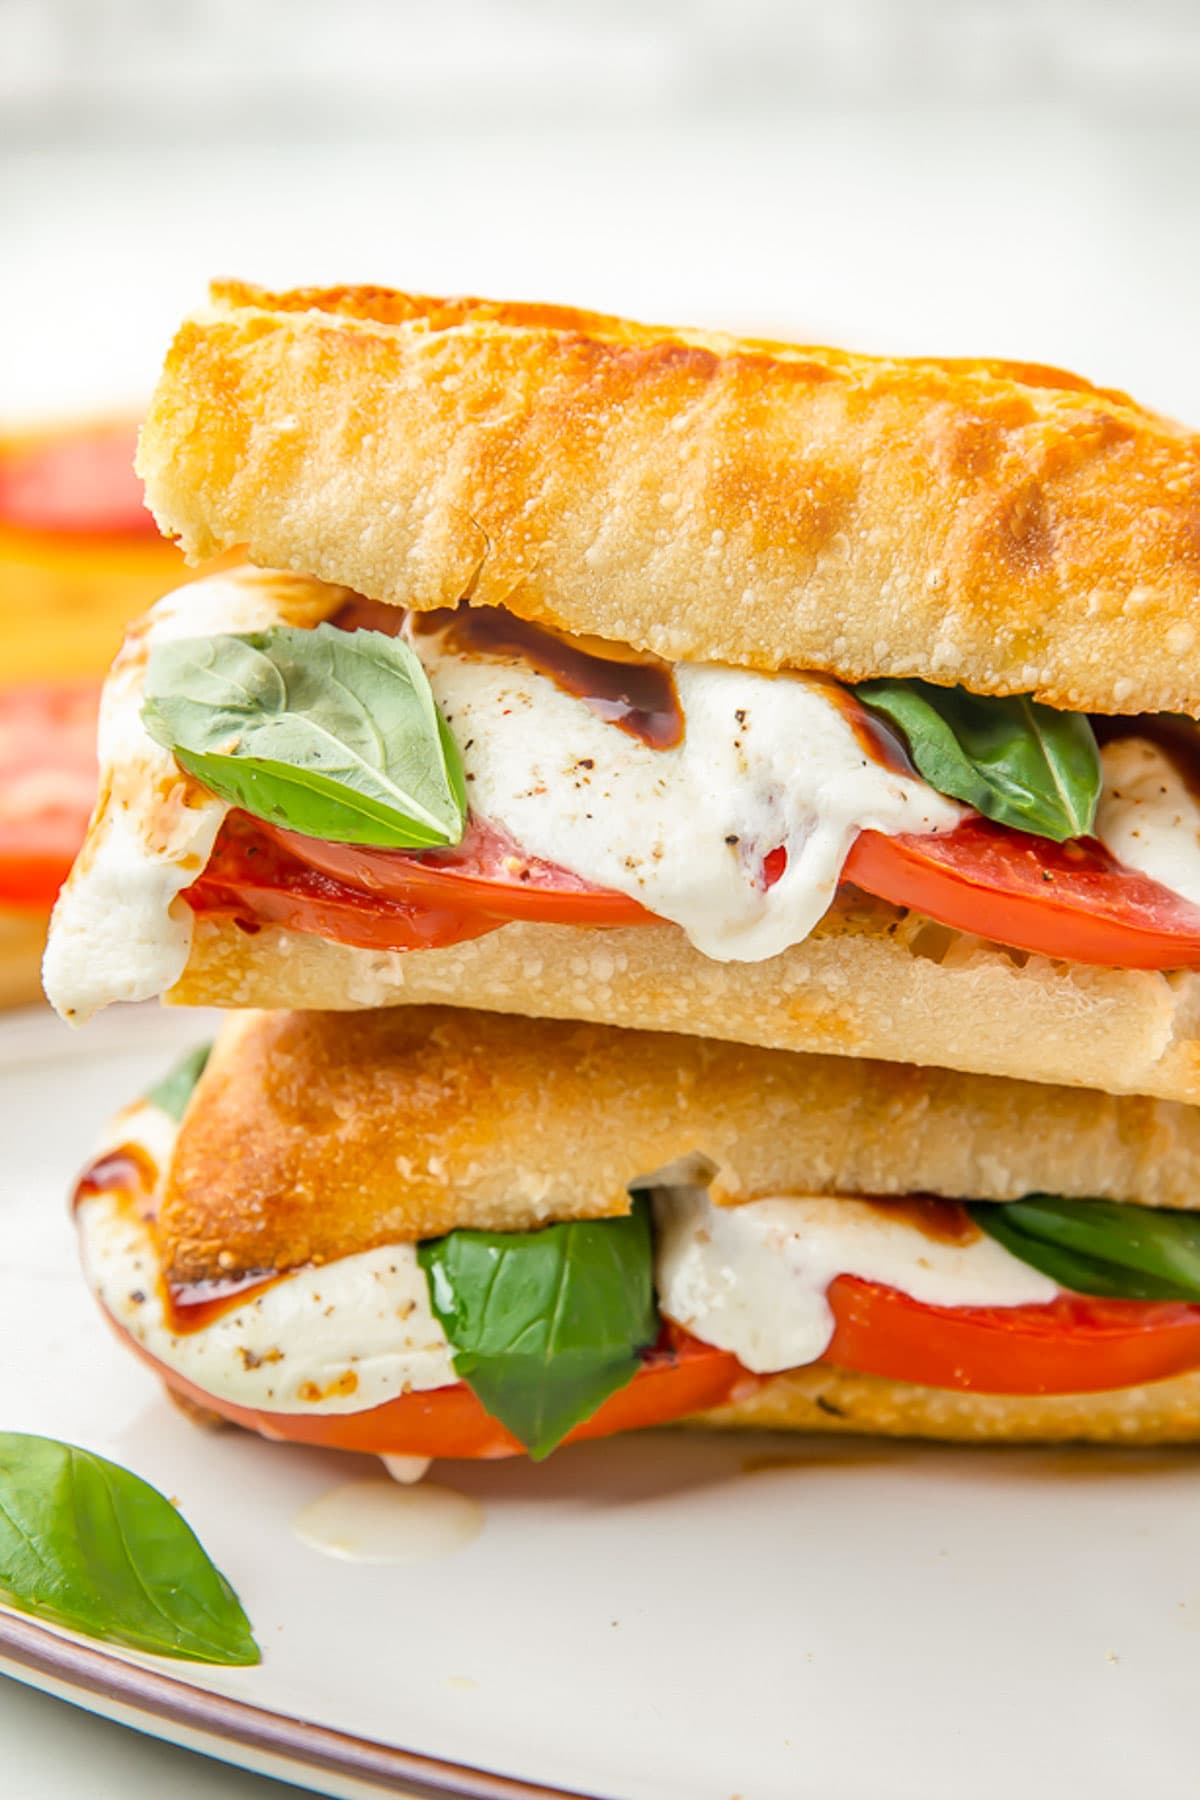 Two halves of a caprese sandwich stacked on top of each other, showing the melted cheese and bright red tomato.